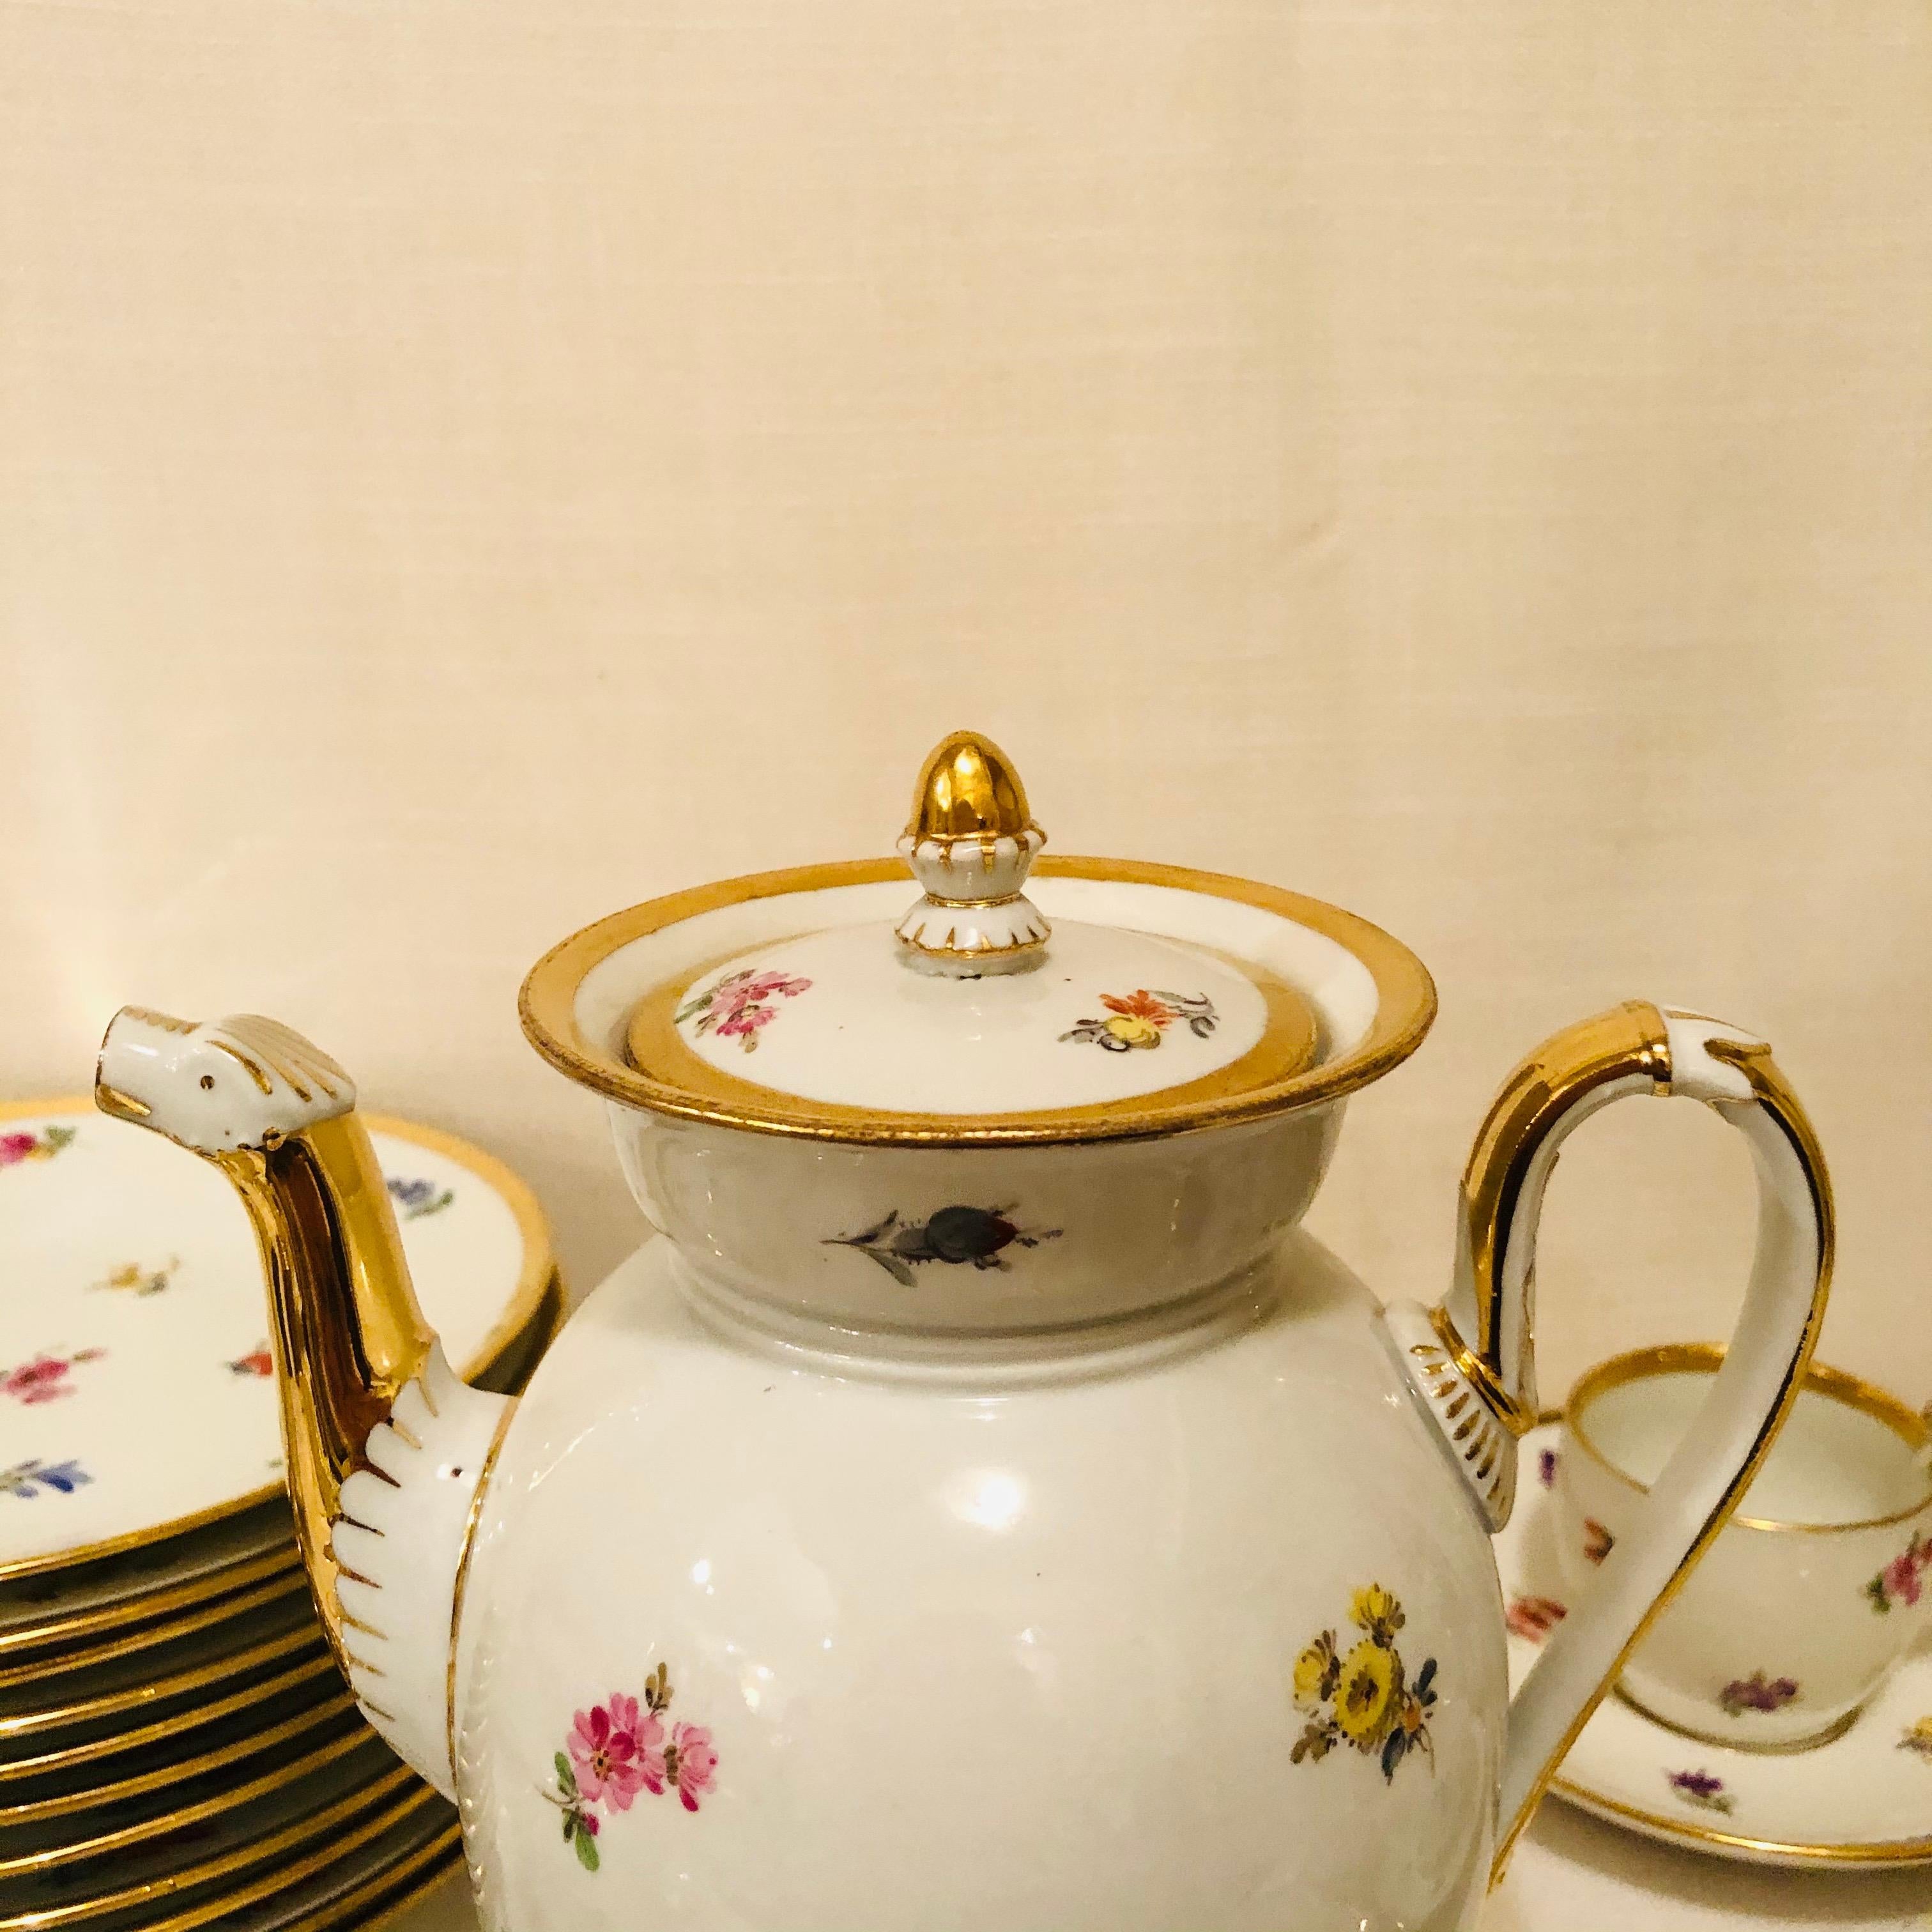 Porcelain Meissen Streublumen Tea Set for 10 with Cups and Saucers, Cake Plates and Teapot